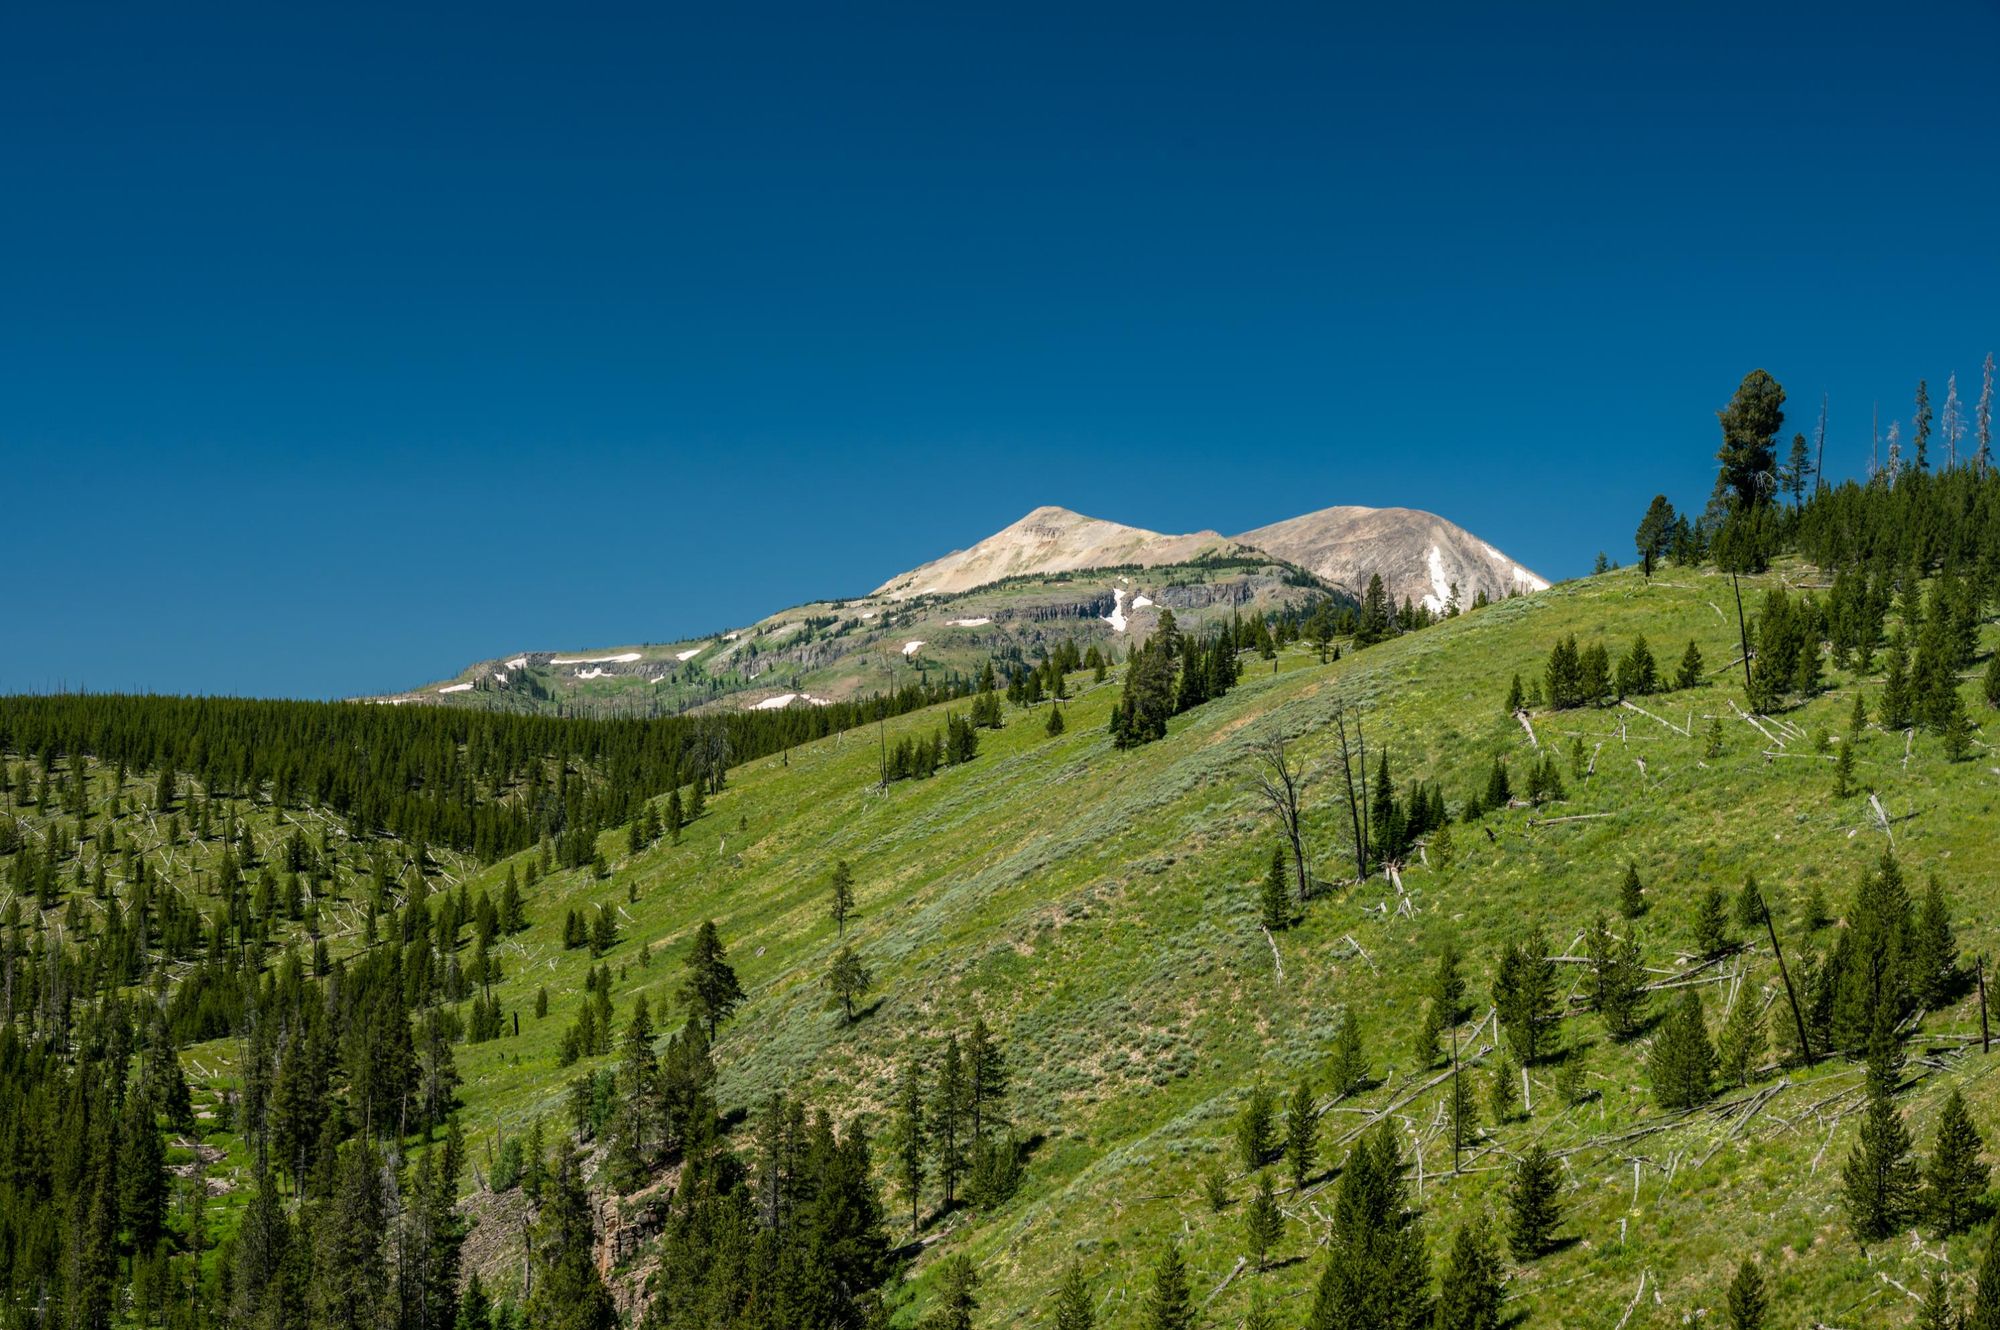 Green rolling hills leading up to Mount Holmes in Yellowstone. Photo: Getty